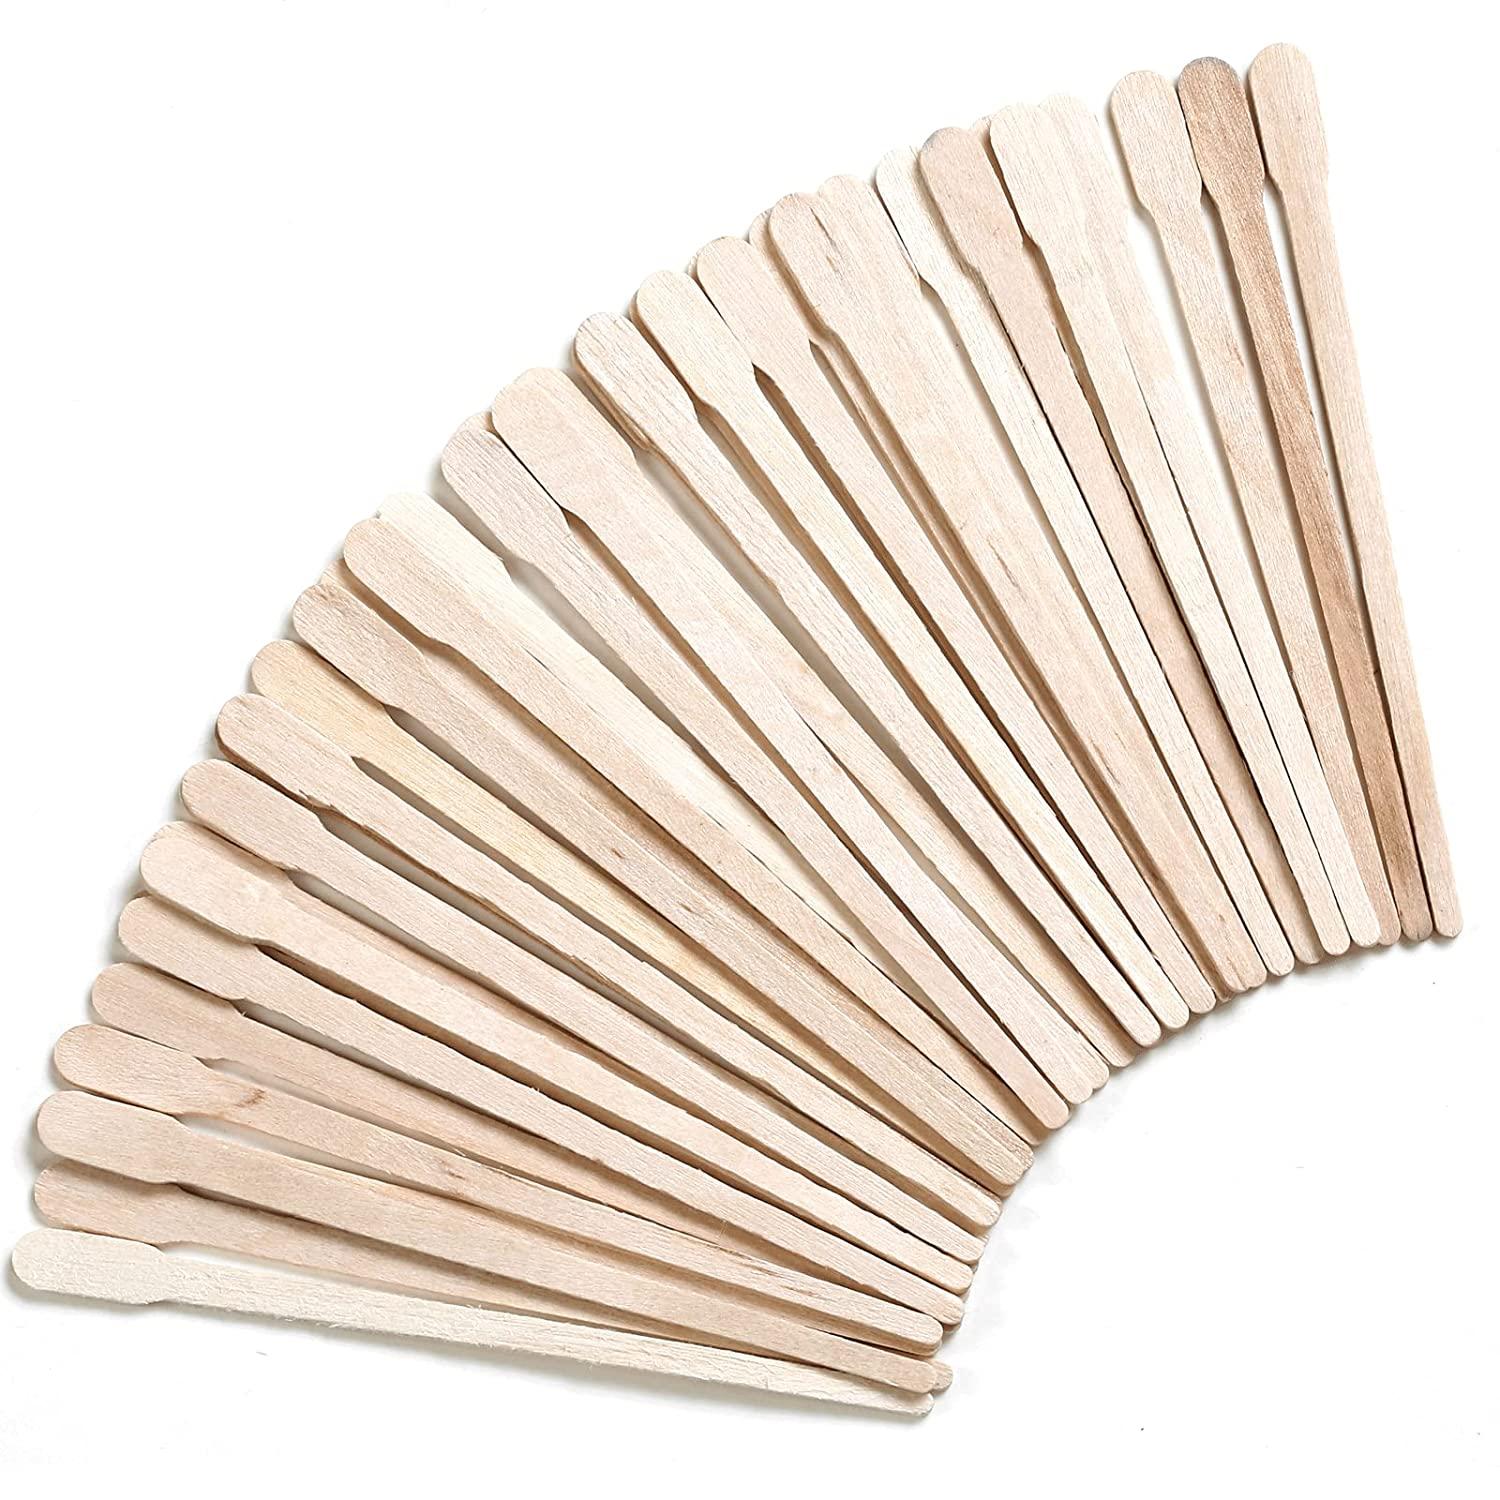  10PCS Wood Waxing Applicator Sticks, Eyebrow Wax Sticks,Wood Wax  Spatulas for Face and Small Hair Removal Sticks,Leg Arm Facial Hair Removal  Tool : Beauty & Personal Care